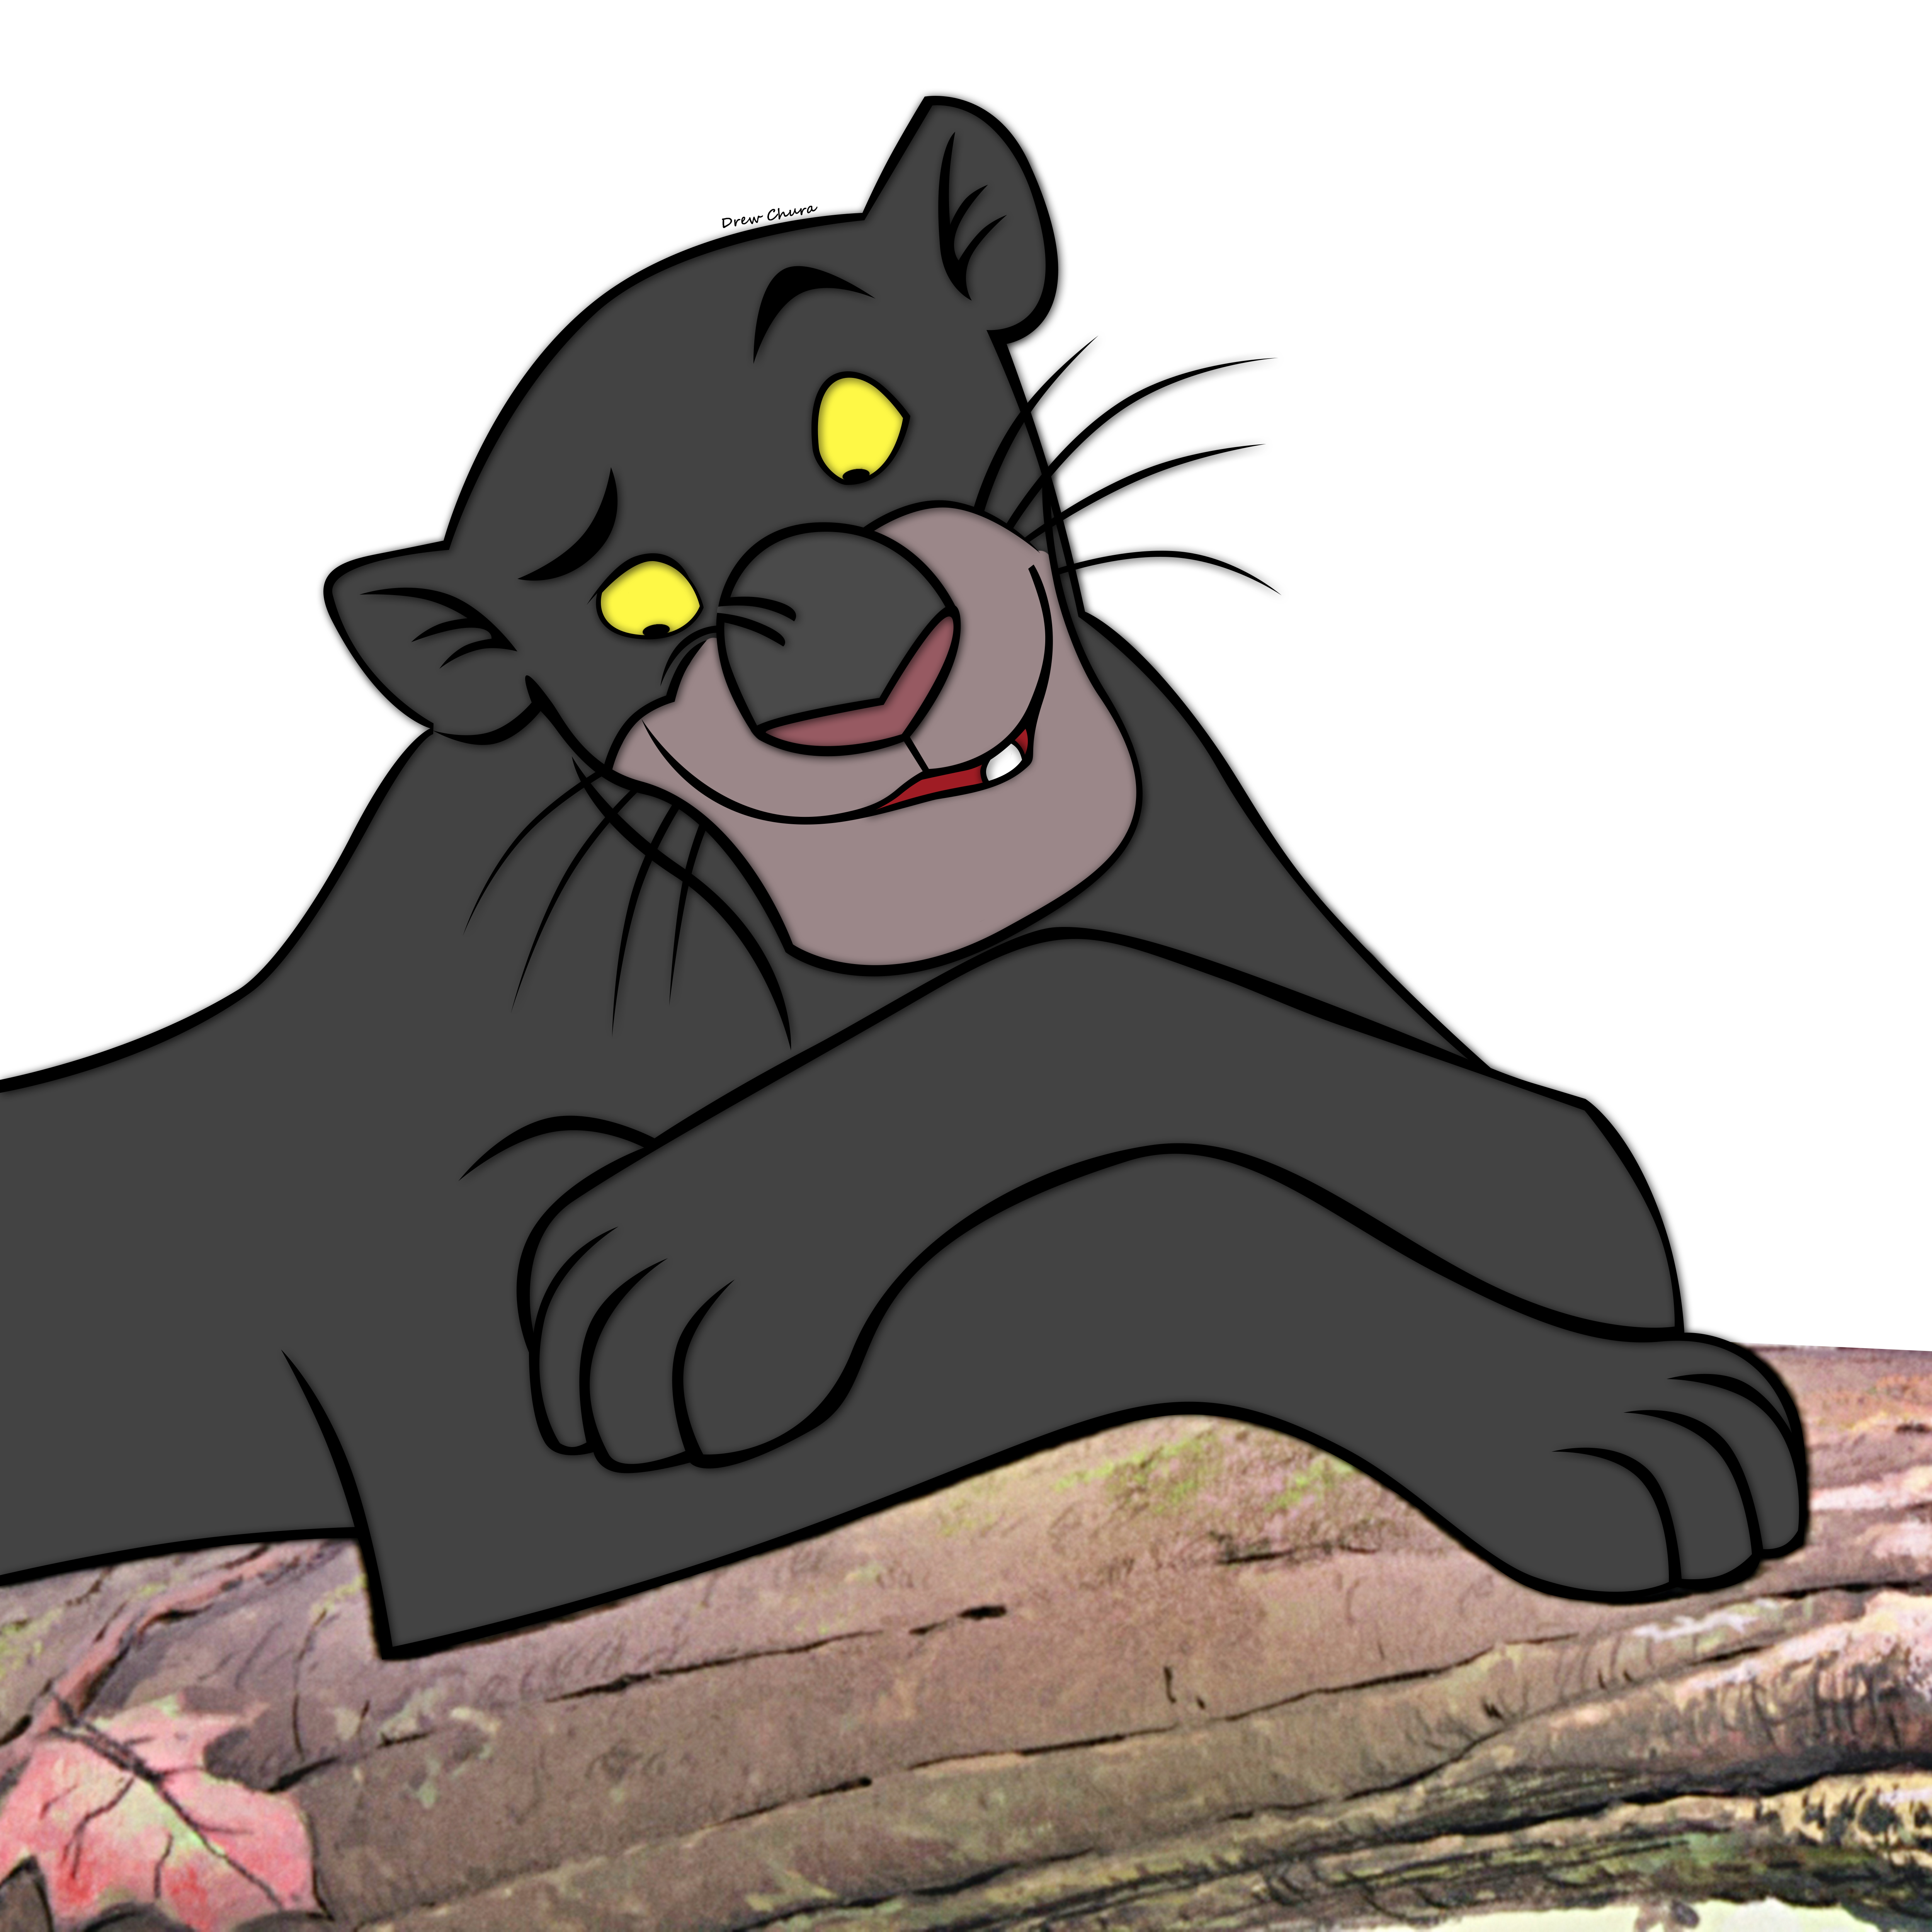 Bagheera from Disney's The Jungle Book. by Spazplayer20 on DeviantArt